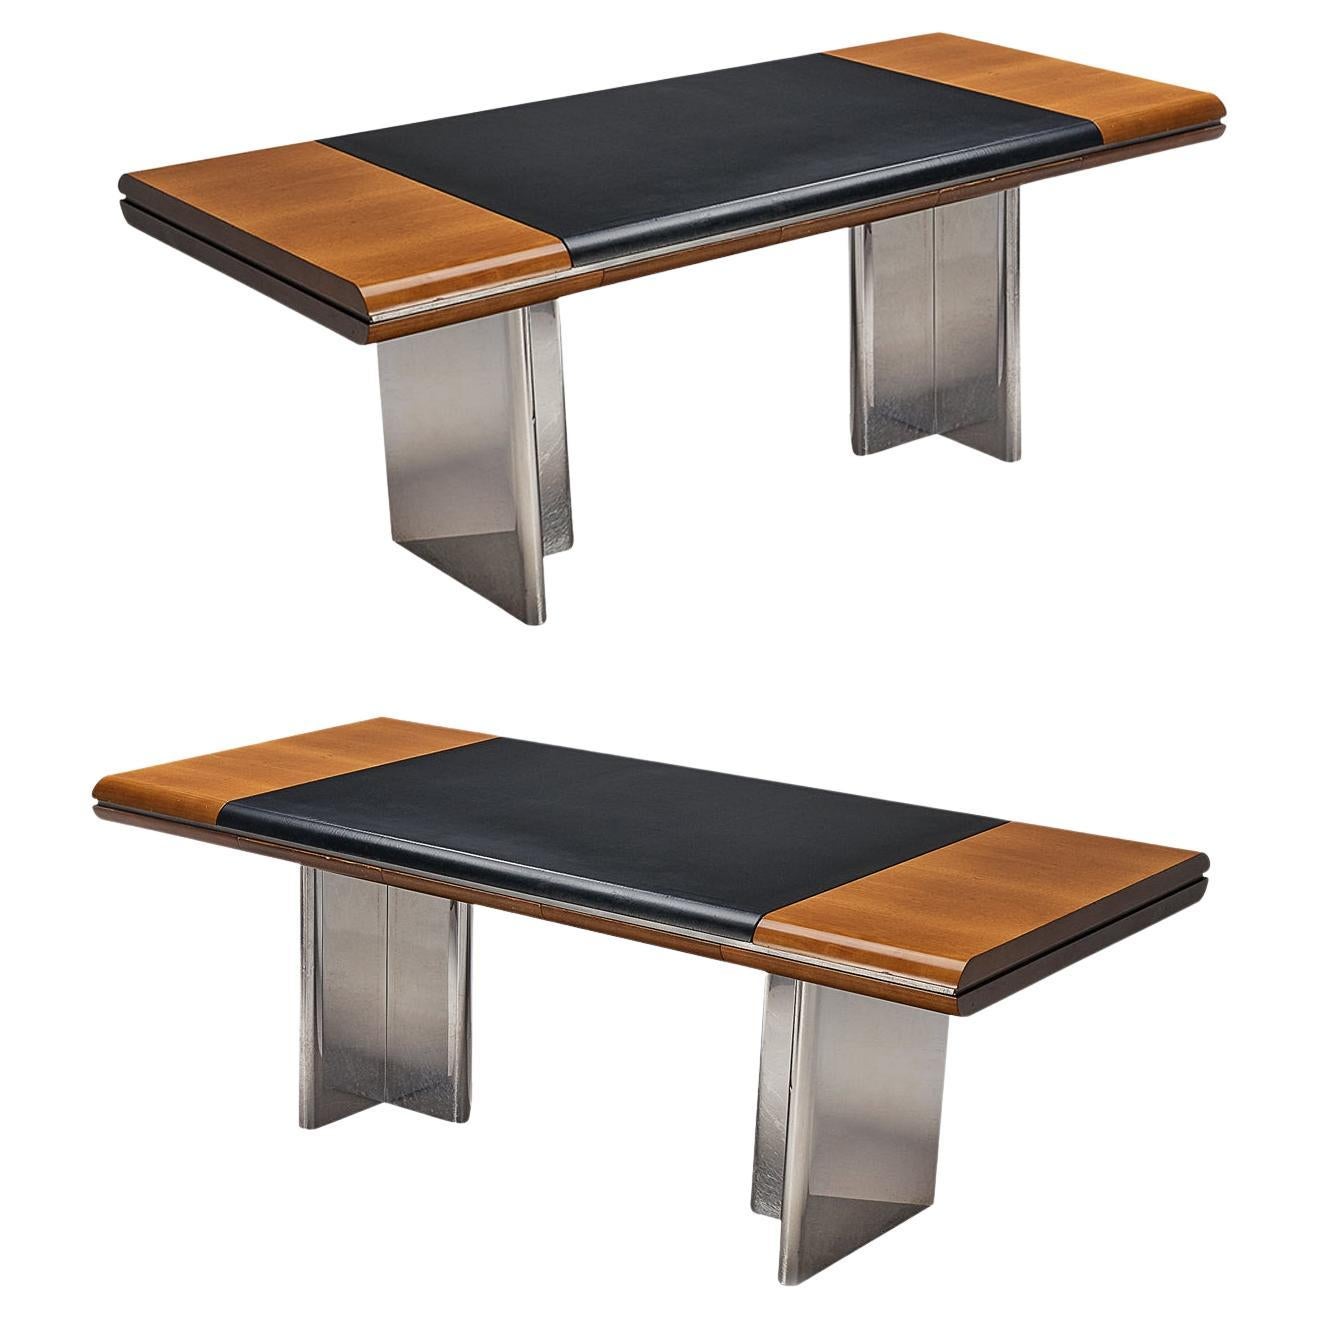 Hans Von Klier for Skipper Executive Desks in Mahogany, Leather and Steel